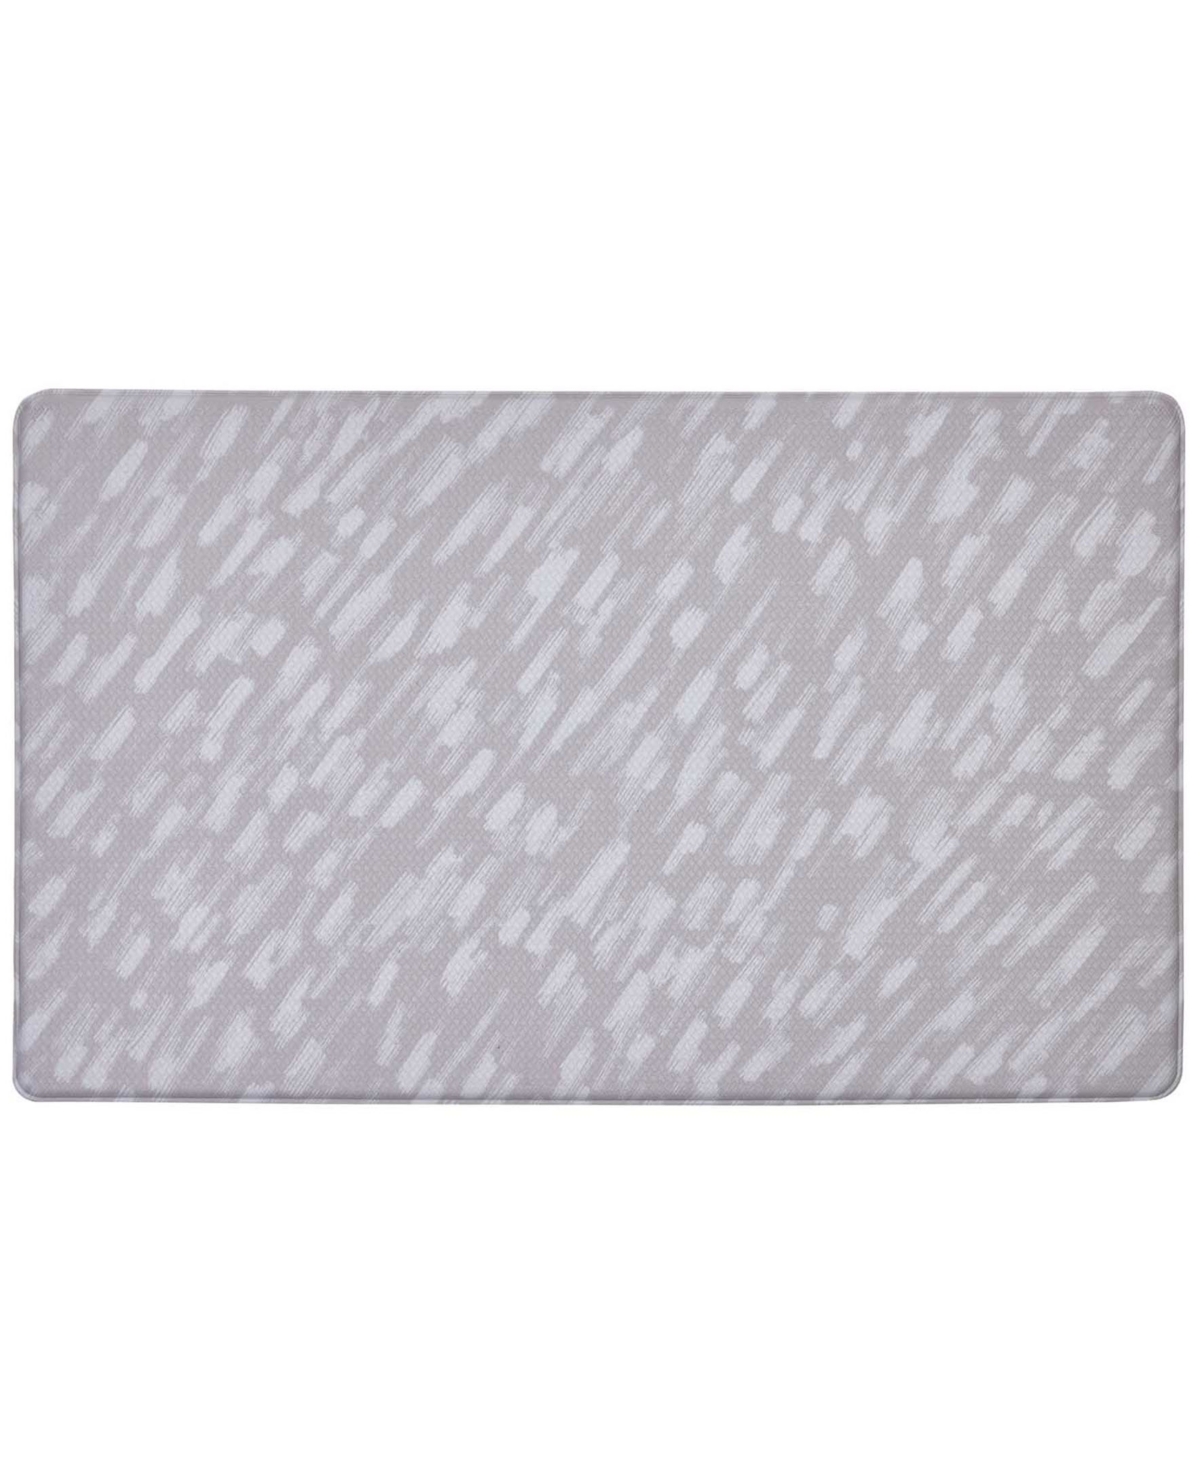 Tommy Bahama 18" X 30" Printed Polyvinyl Chloride Fatigue-resistant Mat In Gray White Rain